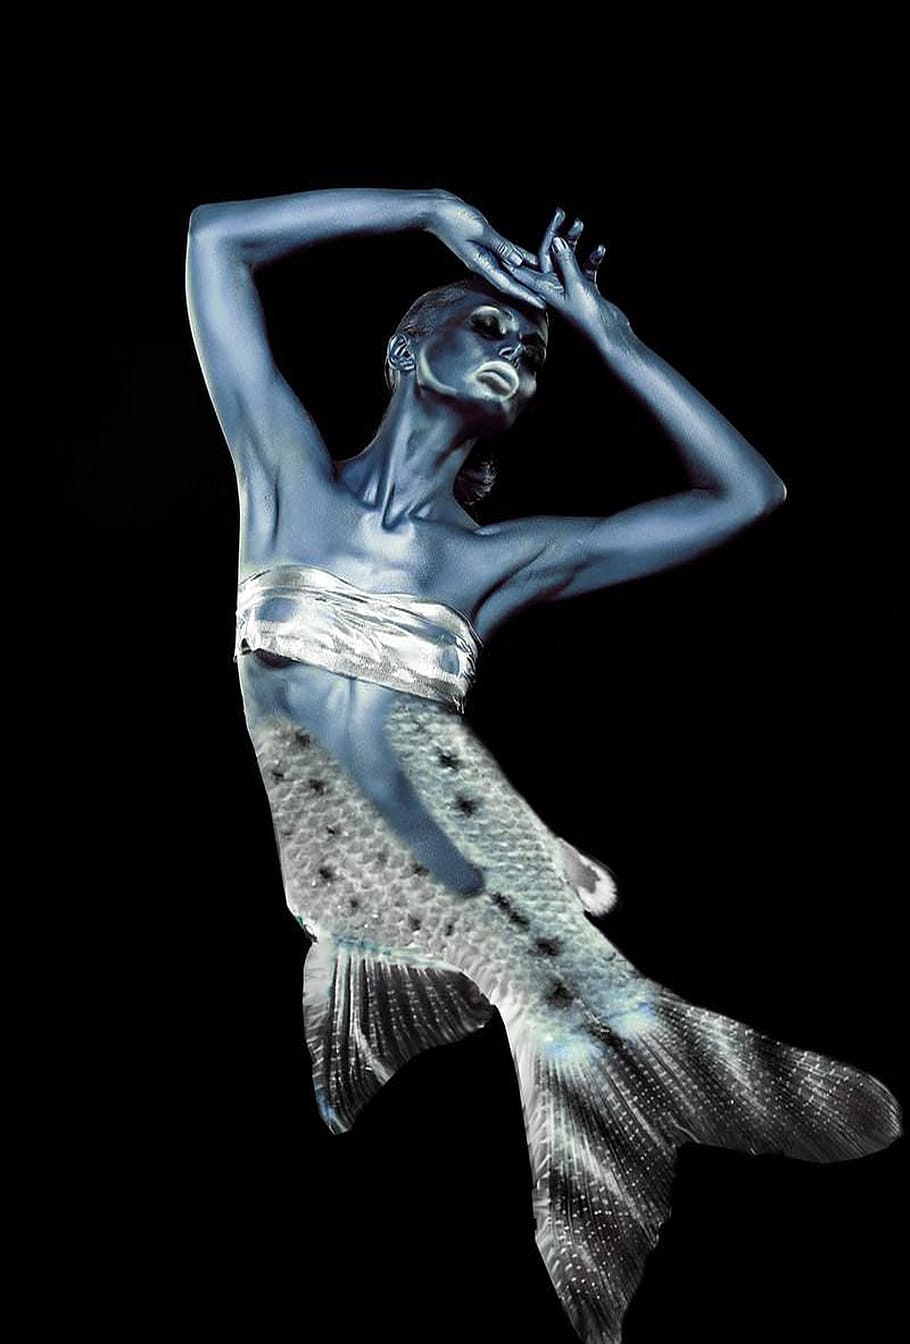 mermaid, fish man, woman, mythical creatures, studio shot, black background, indoors, one person, arms raised, human arm